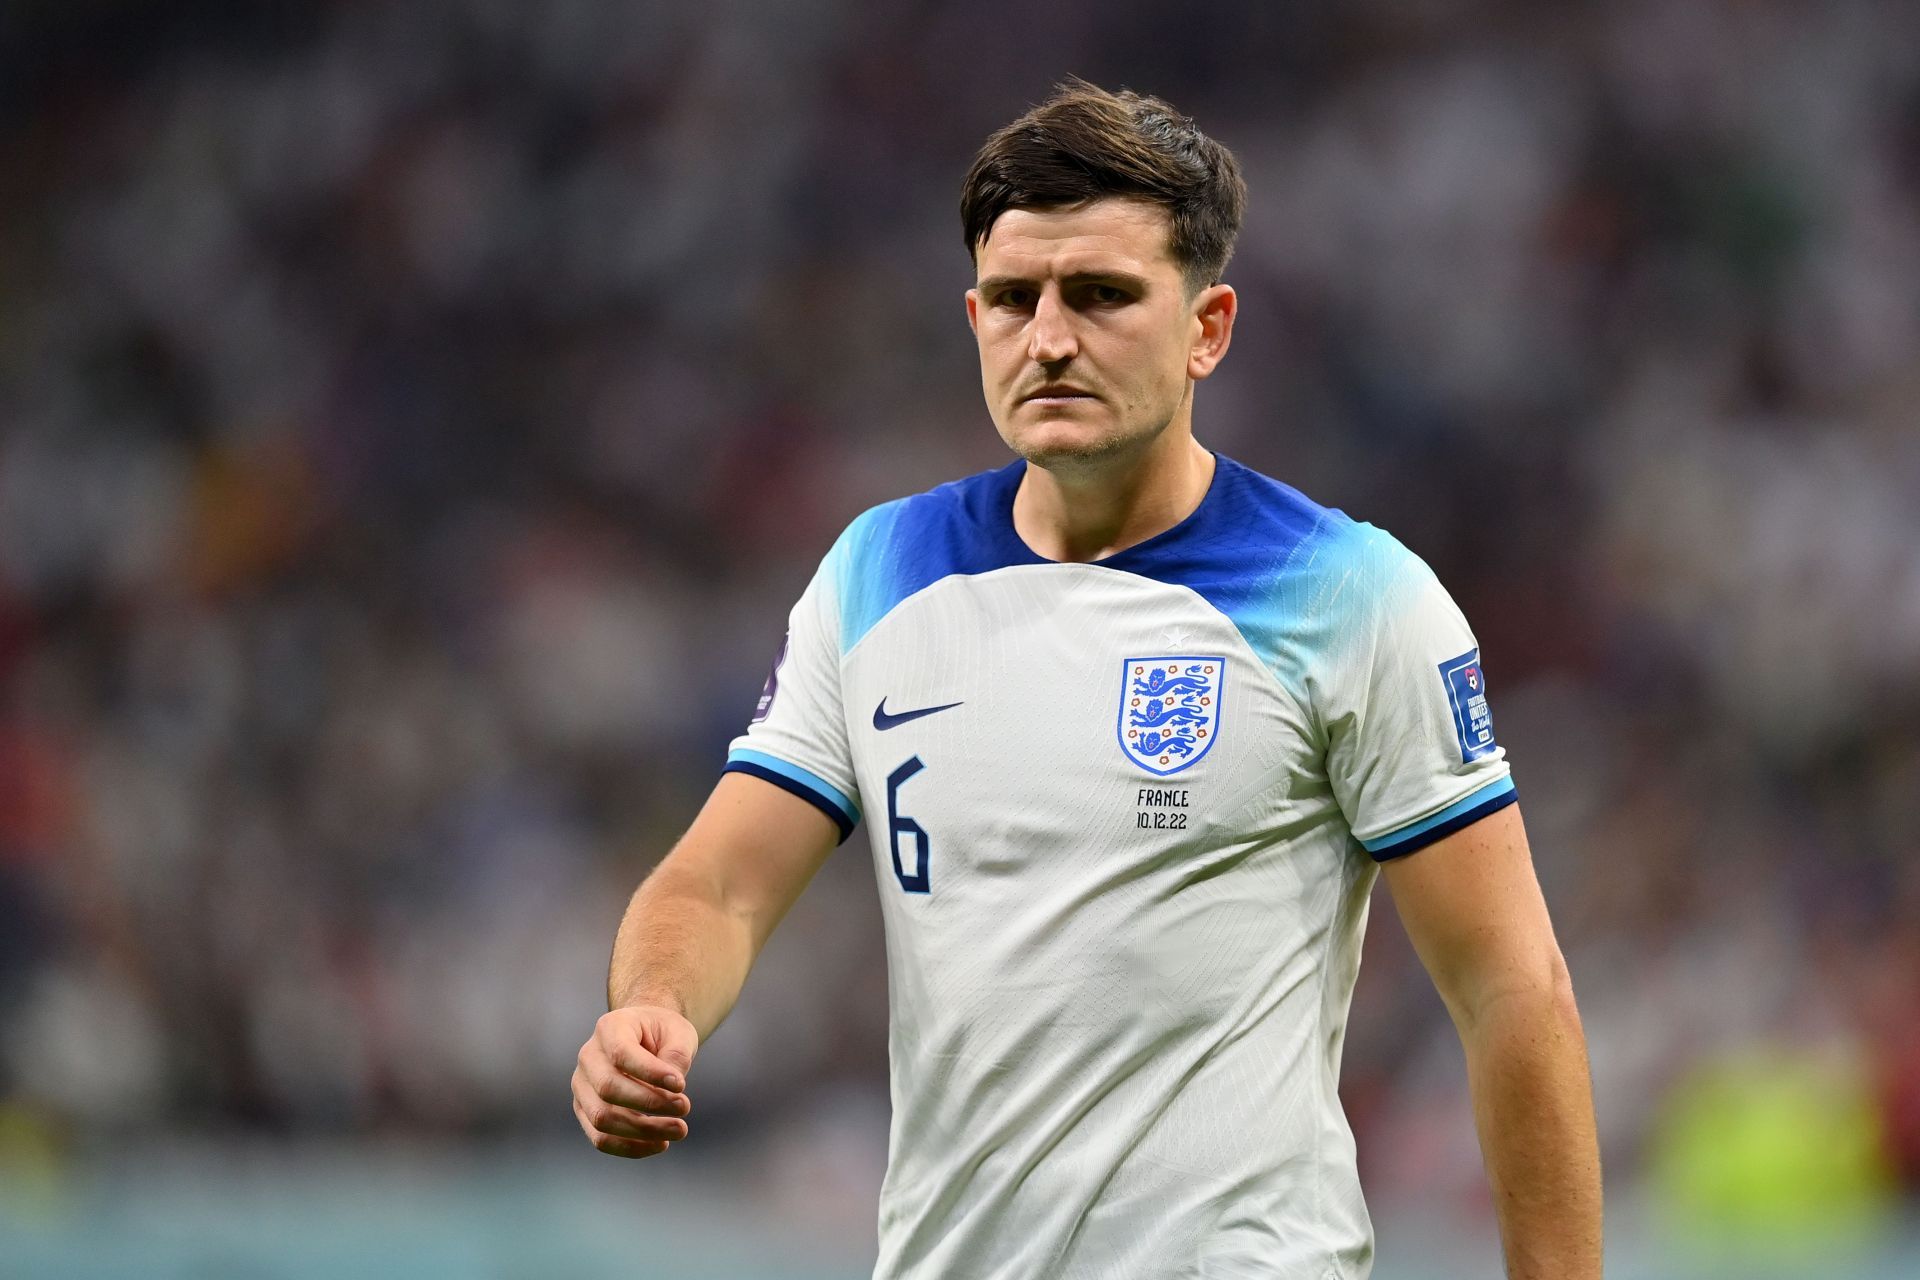 Harry Maguire will be eager to get back into the starting XI at Old Trafford.